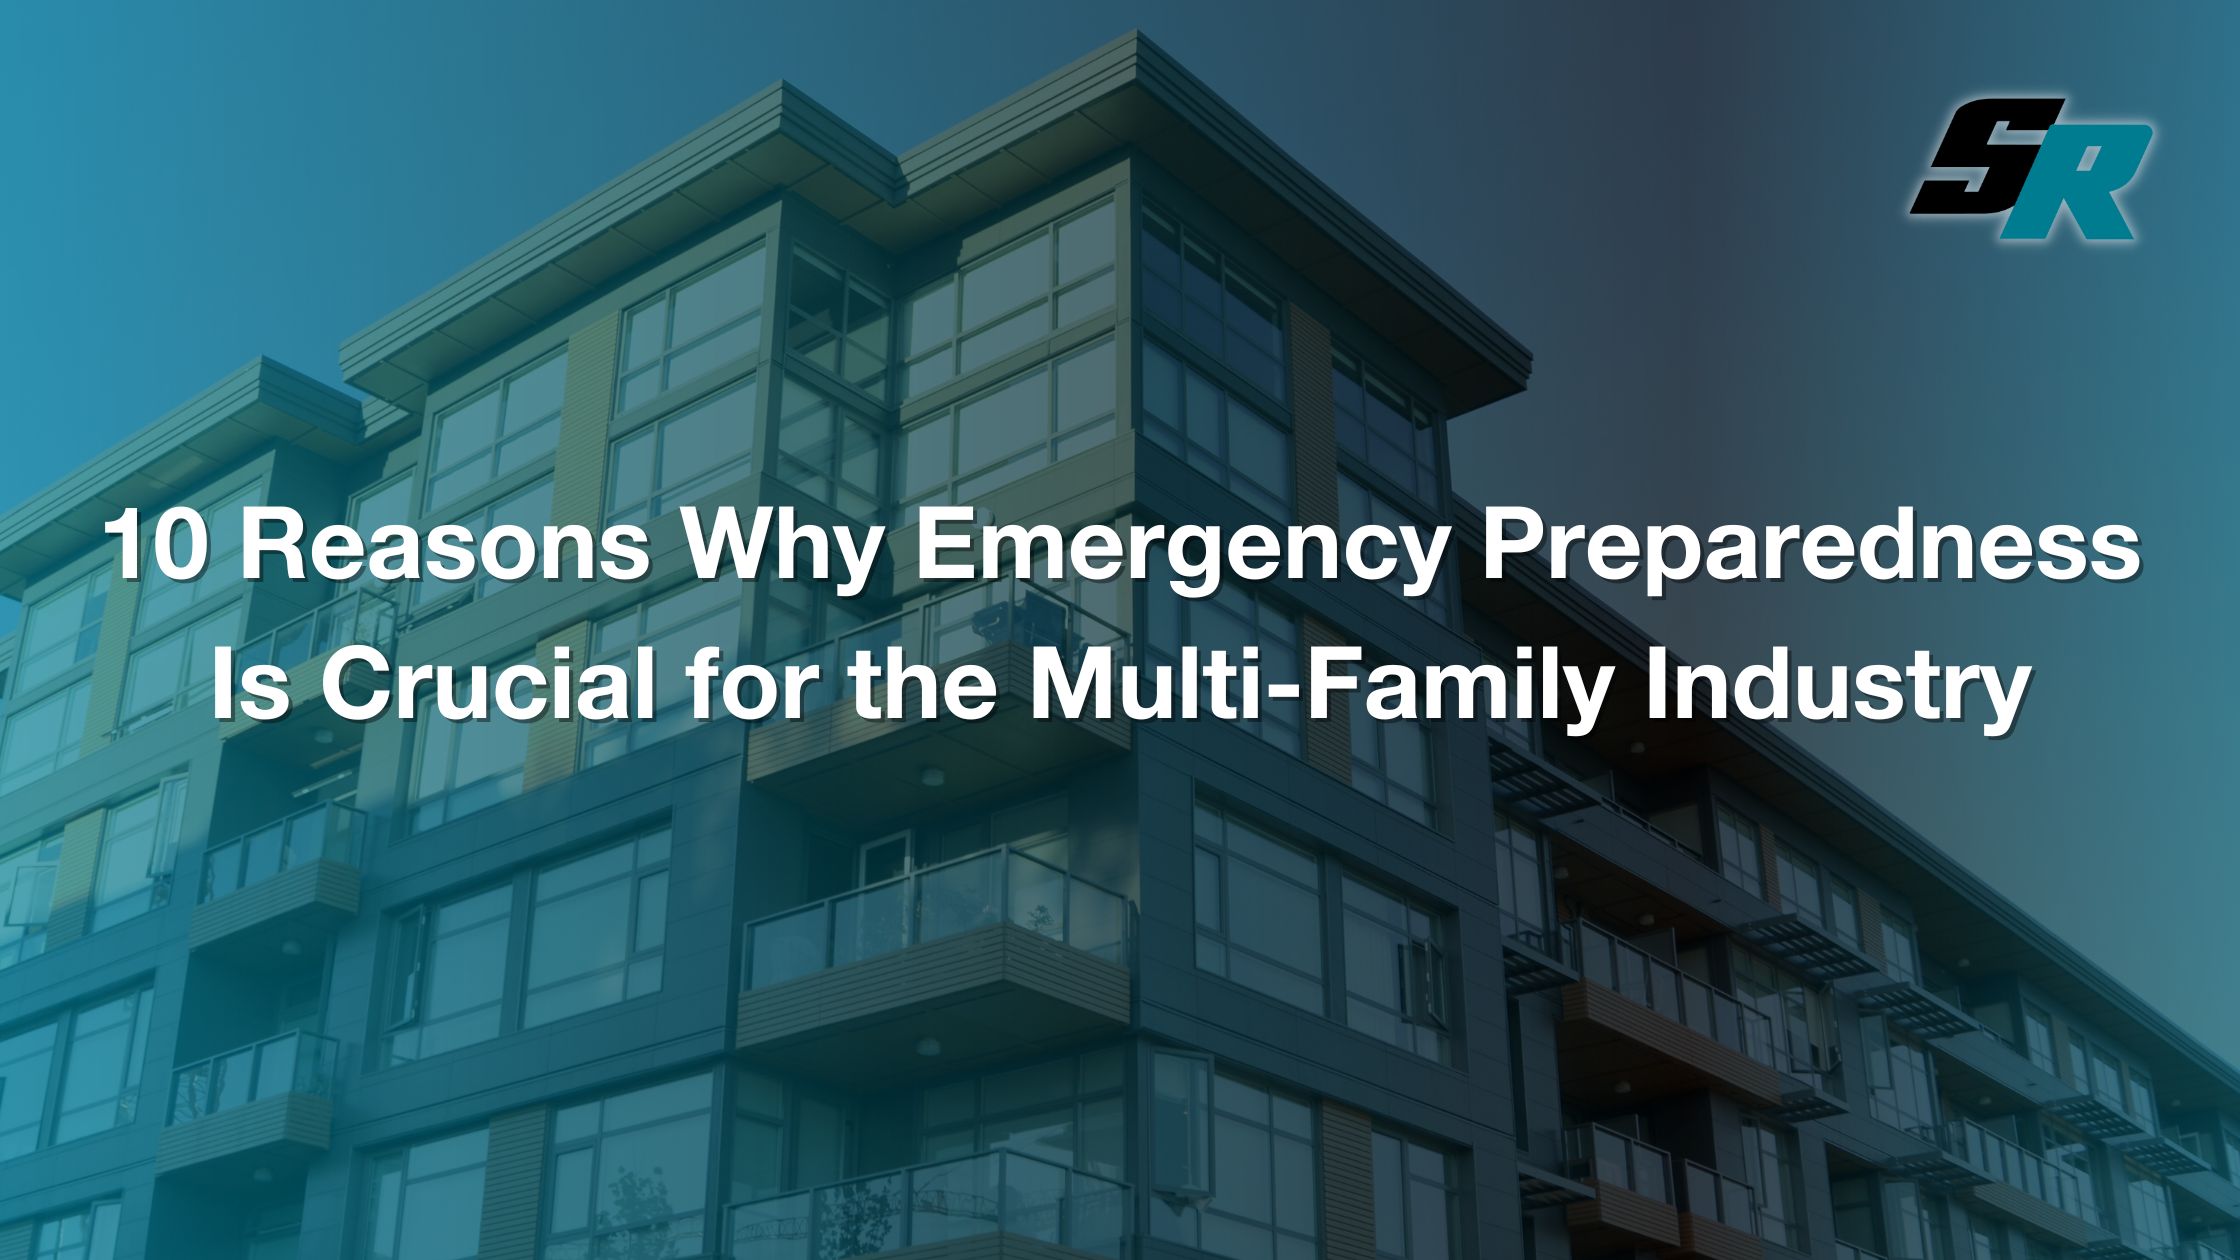 Photo of a multi-story apartment complex with the text "10 reasons why emergency preparedness is crucial for the multi-family industry"